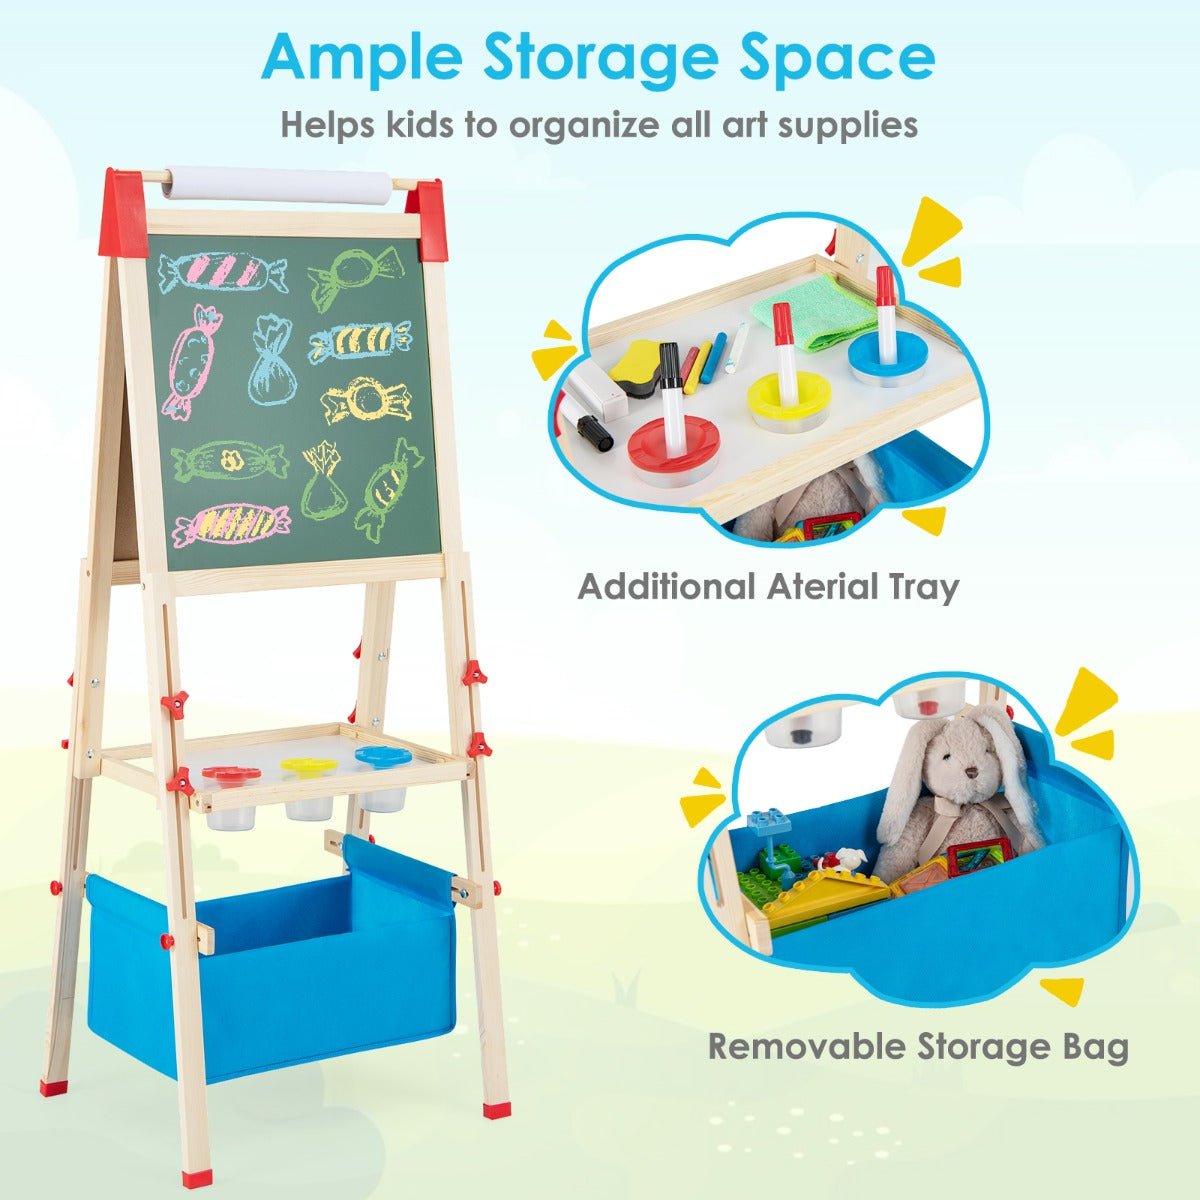 Adjustable Height Double Sided Easel with Magnetic Chalkboard for Toddlers